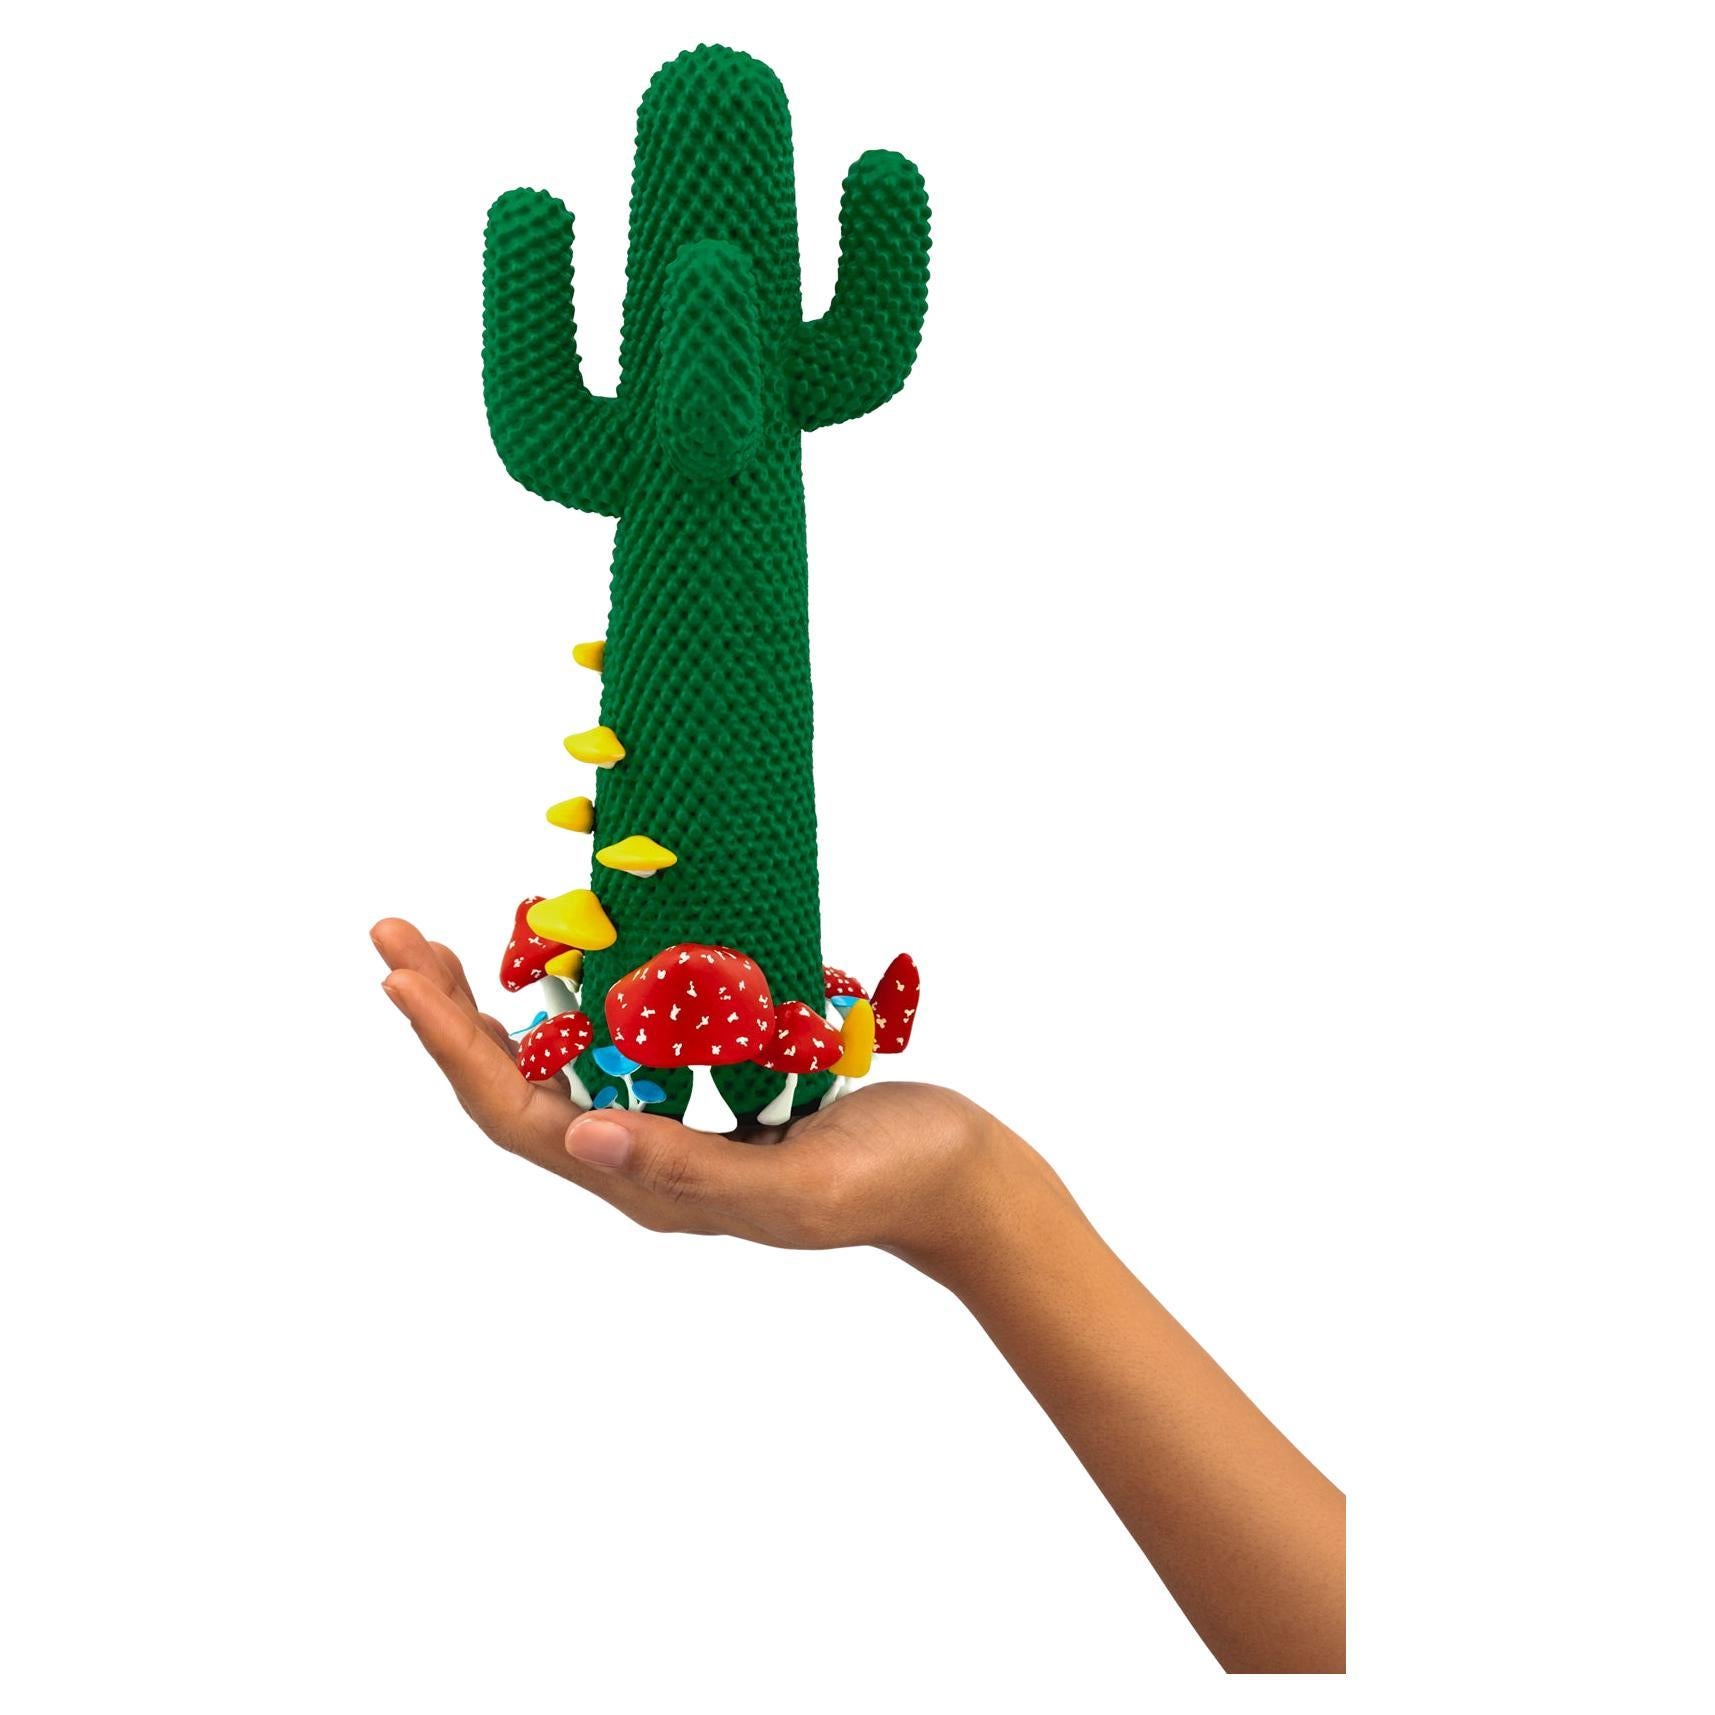 LIMITED EDITION #49/99

Gufram presents the miniaturised version of the Shroom CACTUS® created in collaboration with A$AP Rocky and the artist’s new design studio HOMMEMADE Exactly as the real-size Shroom CACTUS®, the new Guframini piece features